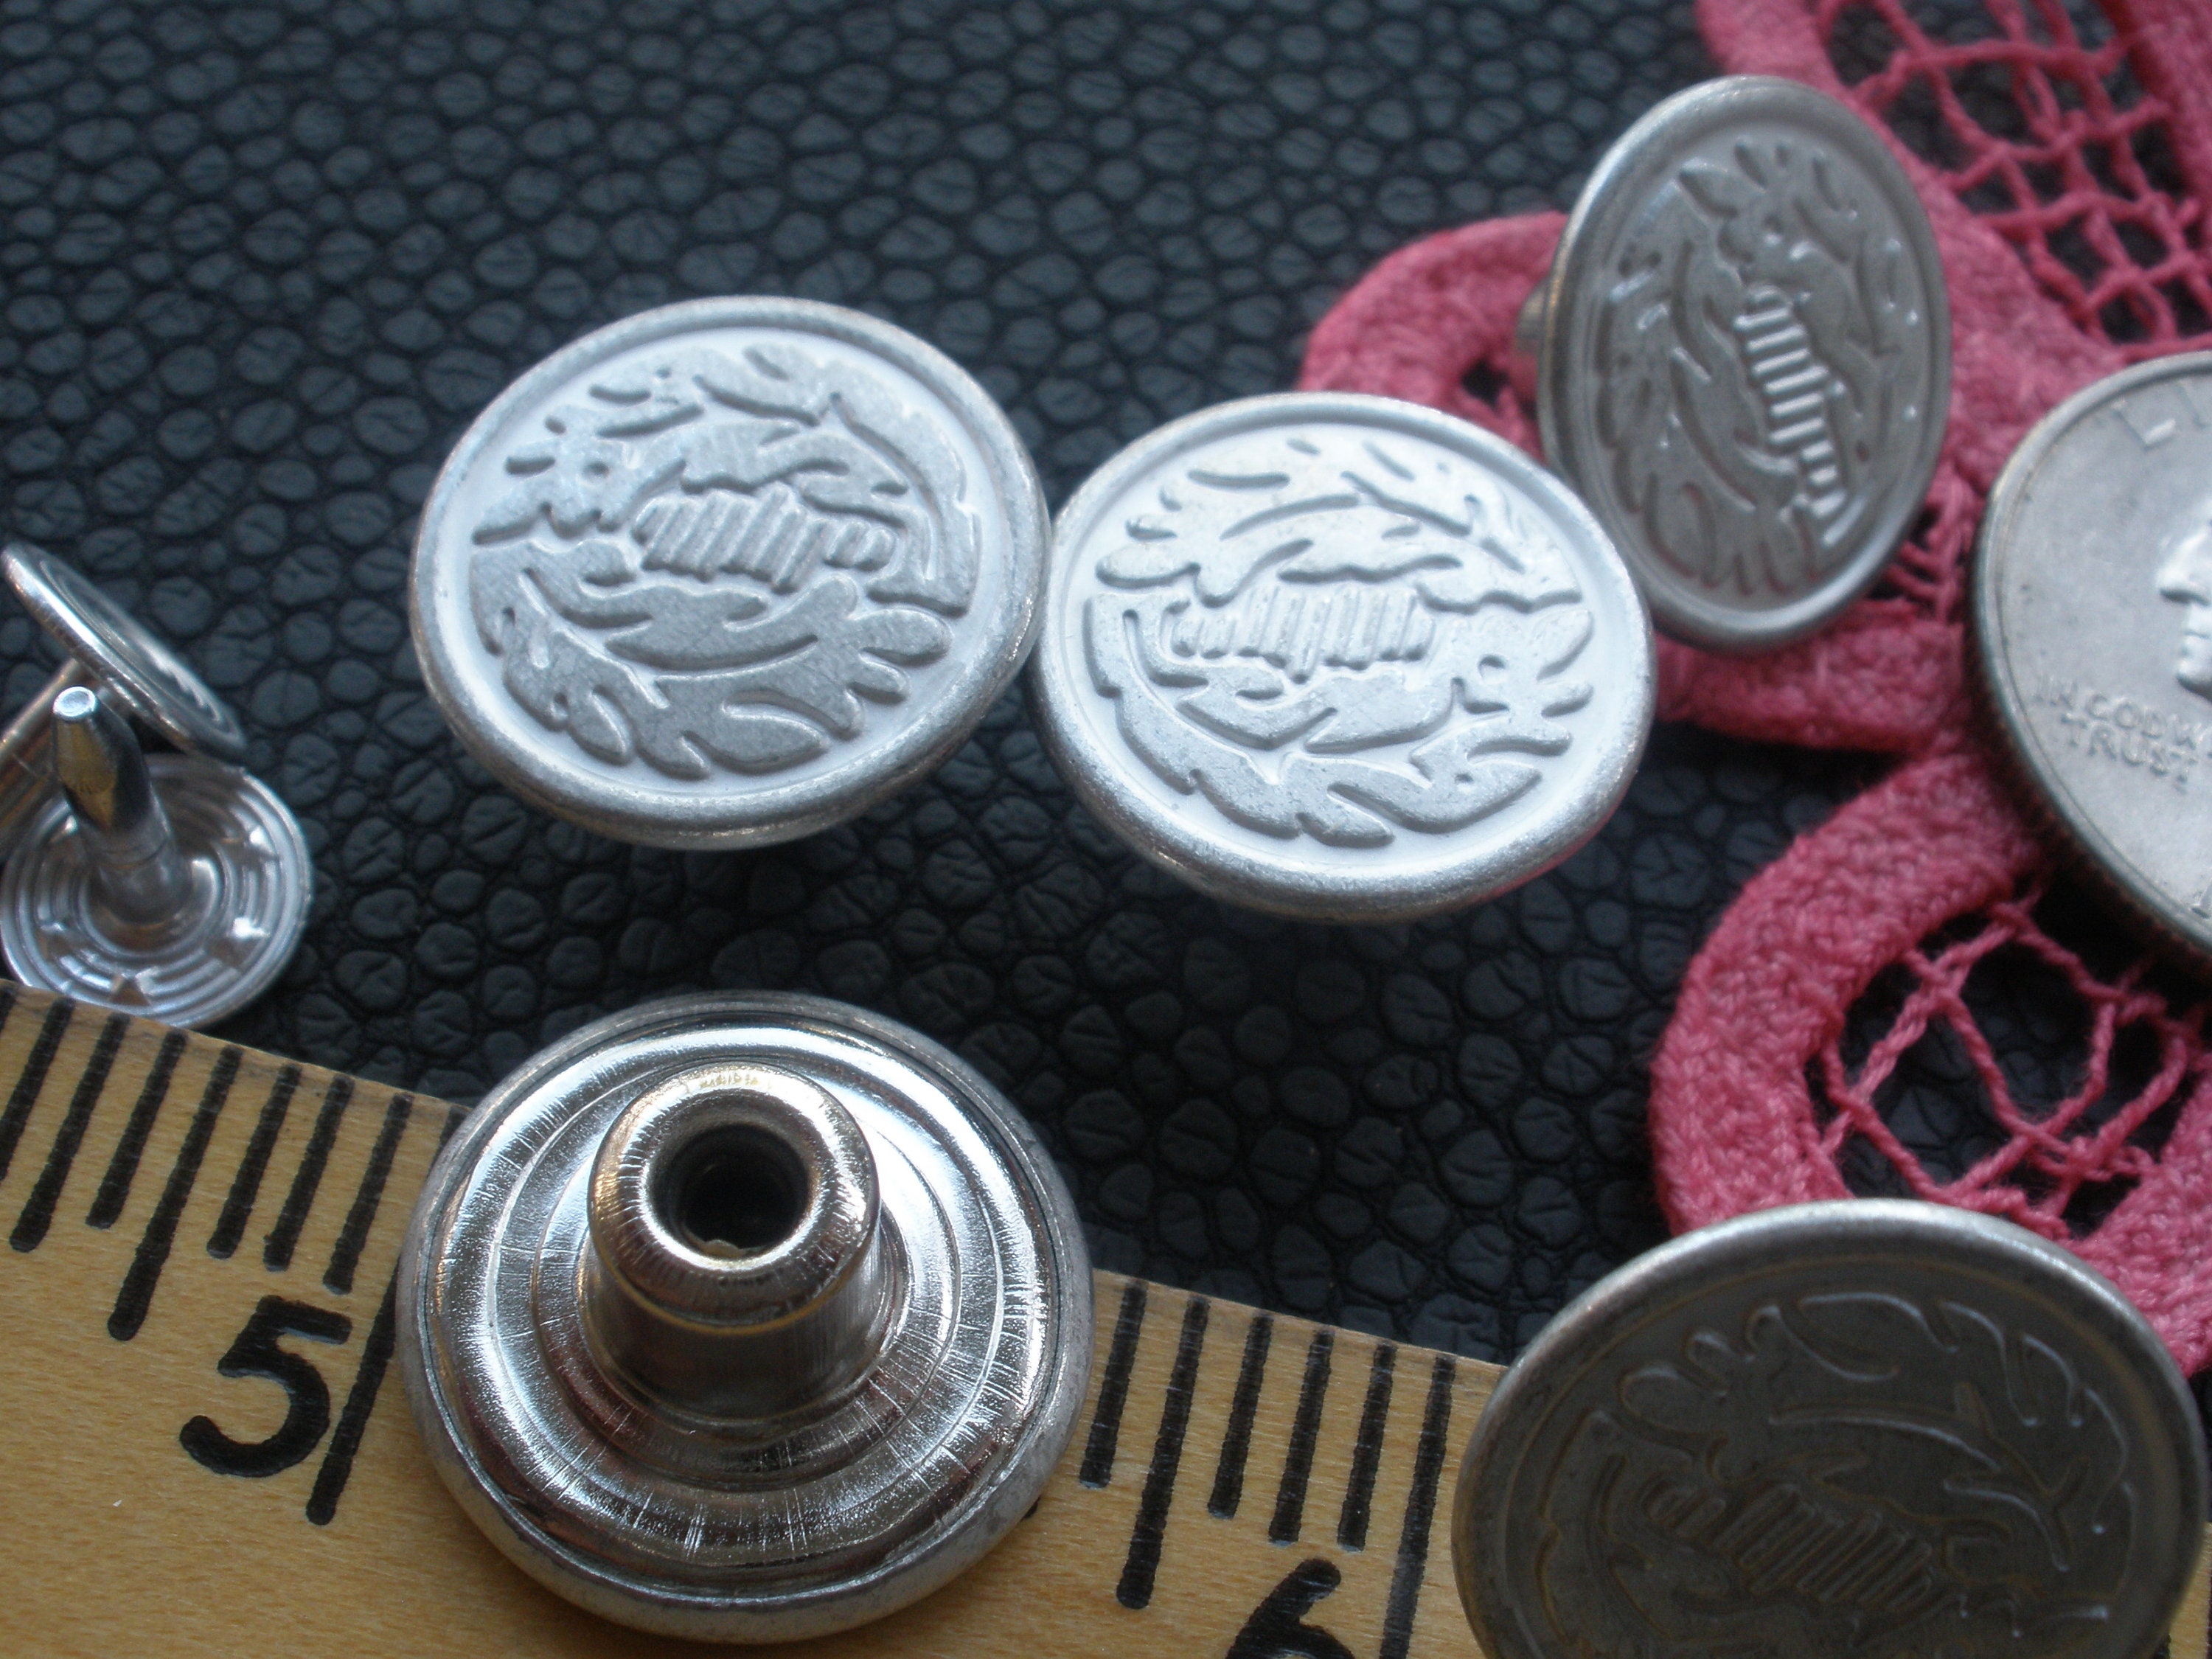 17mm Matte Silver Color Metal Tack Buttons Leaf Pattern No Sew 